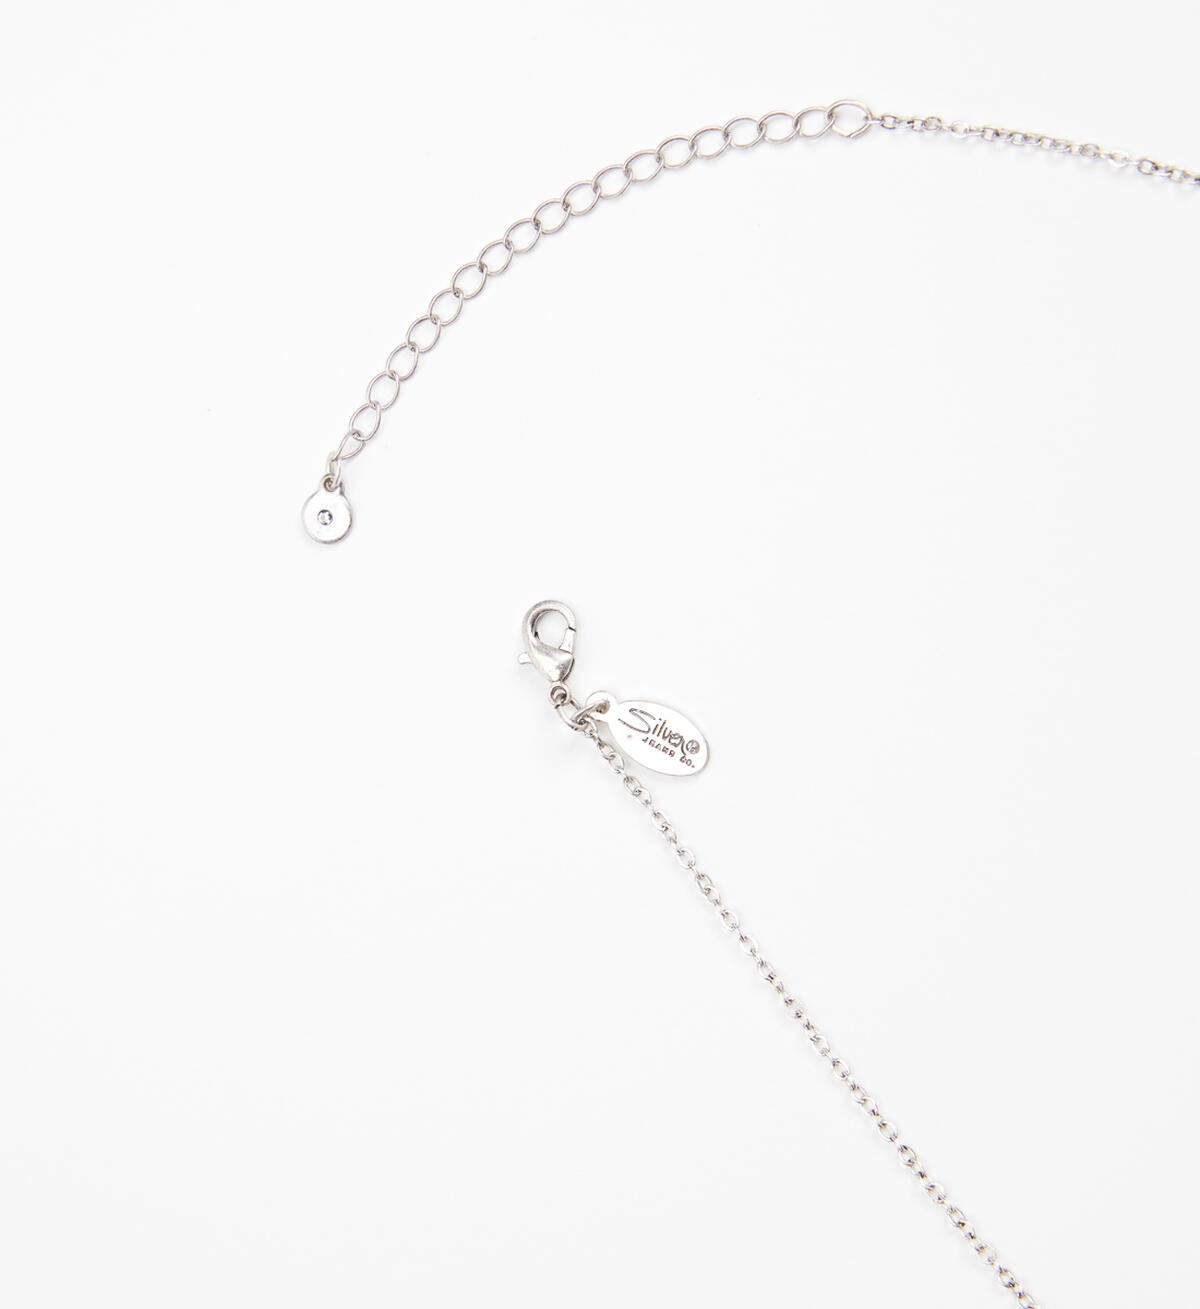 Silver-Tone Layered Y Pendant Necklace, , hi-res image number 2